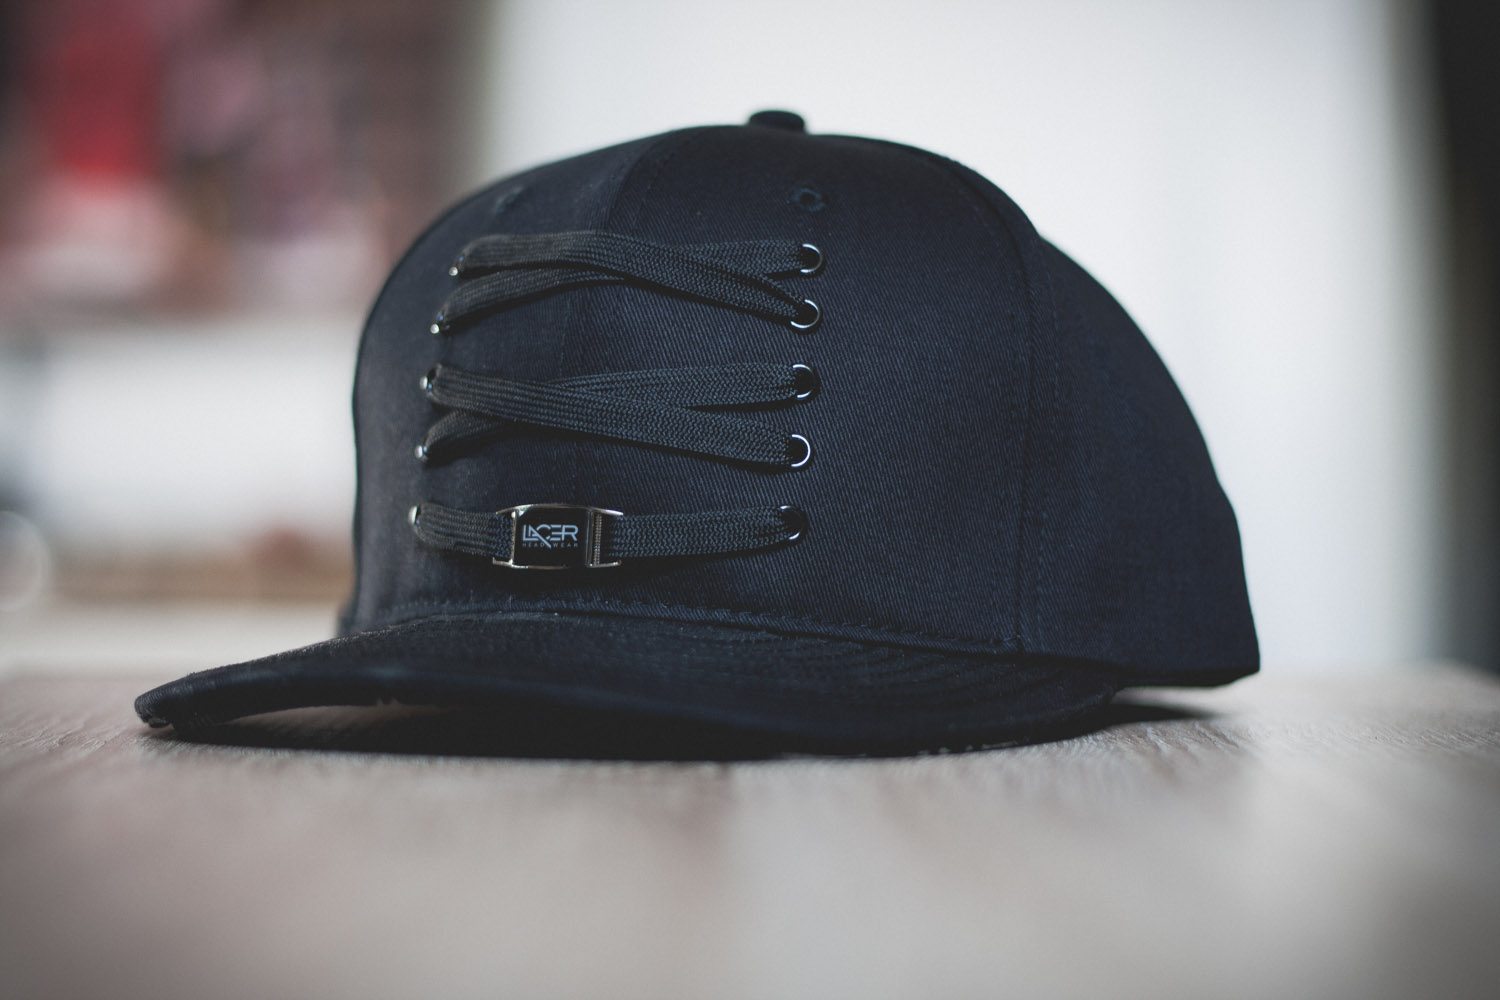 Lacer Headwear All Black Review 14